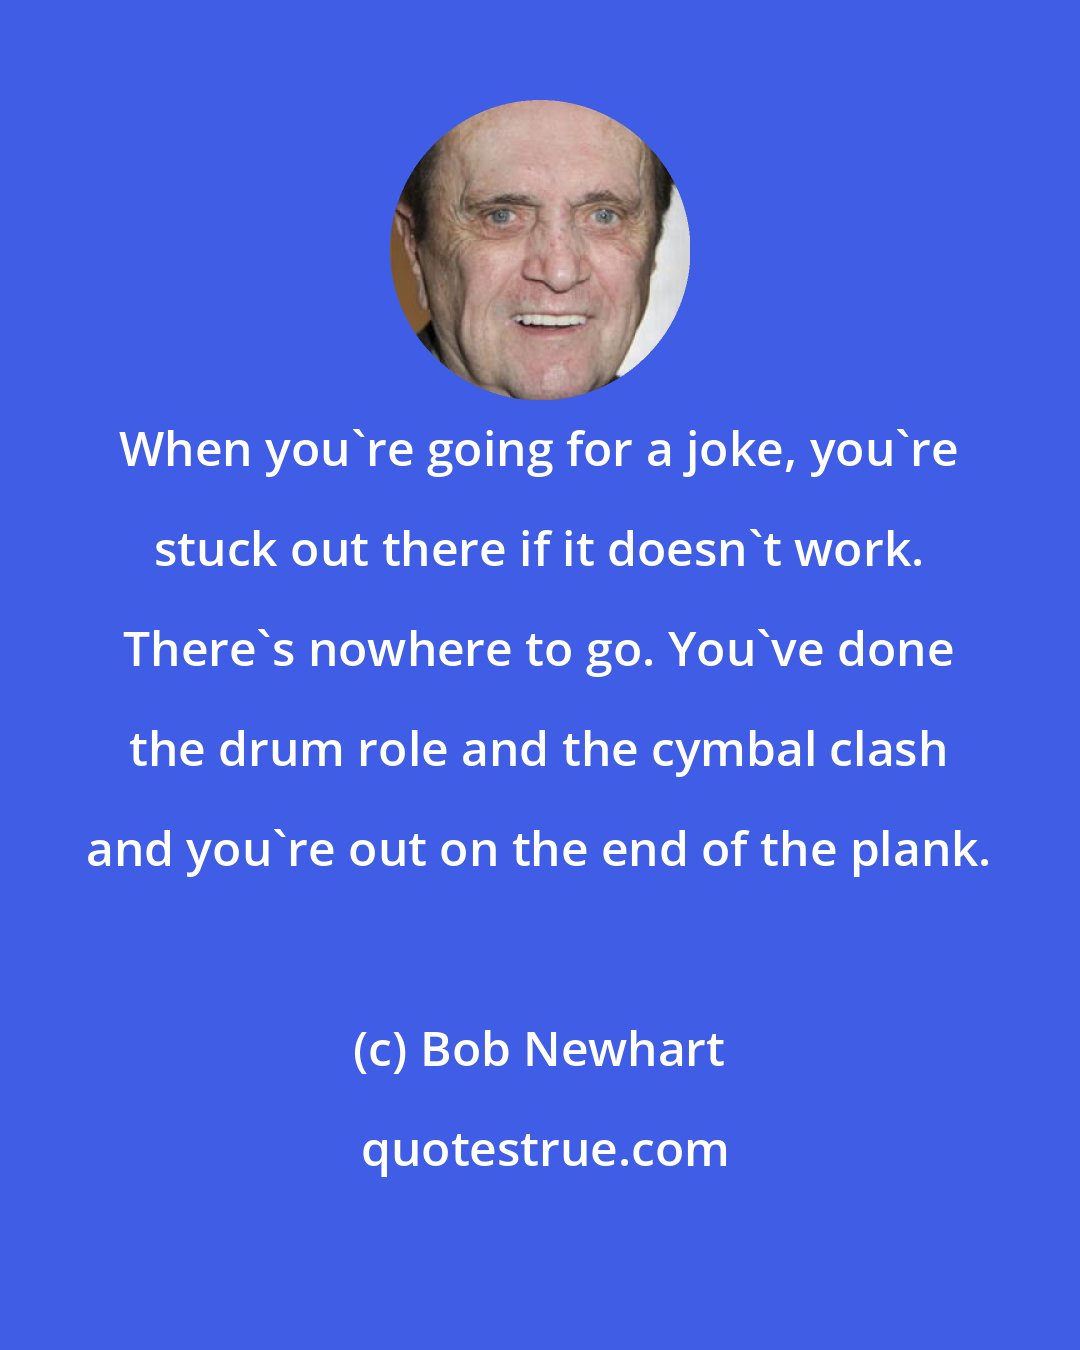 Bob Newhart: When you're going for a joke, you're stuck out there if it doesn't work. There's nowhere to go. You've done the drum role and the cymbal clash and you're out on the end of the plank.